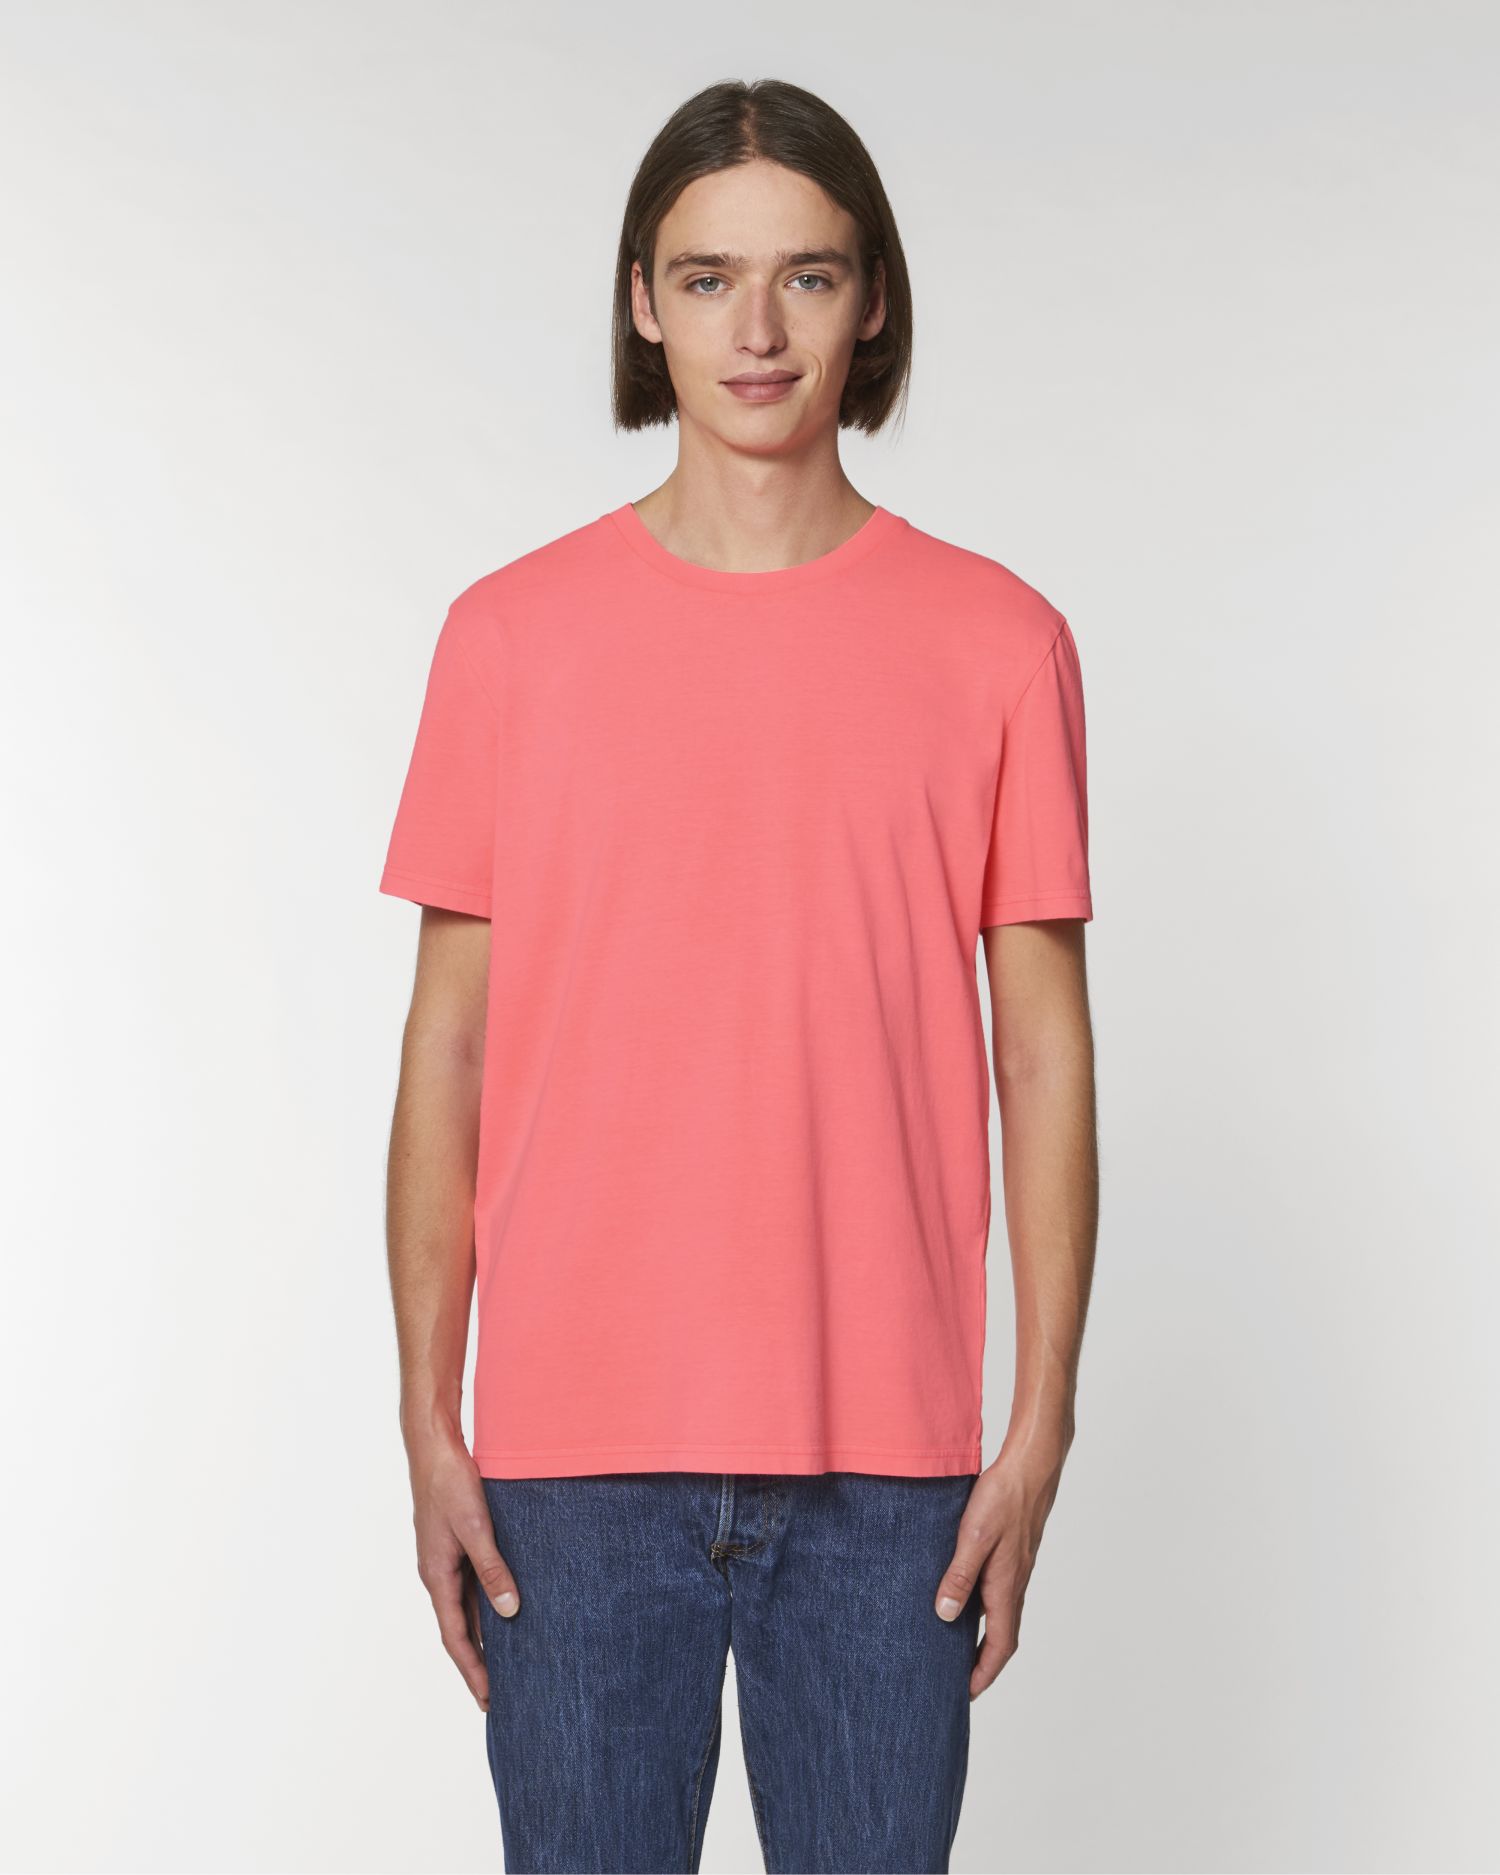 T-Shirt Creator Vintage in Farbe G. Dyed Fluo Pink Crush